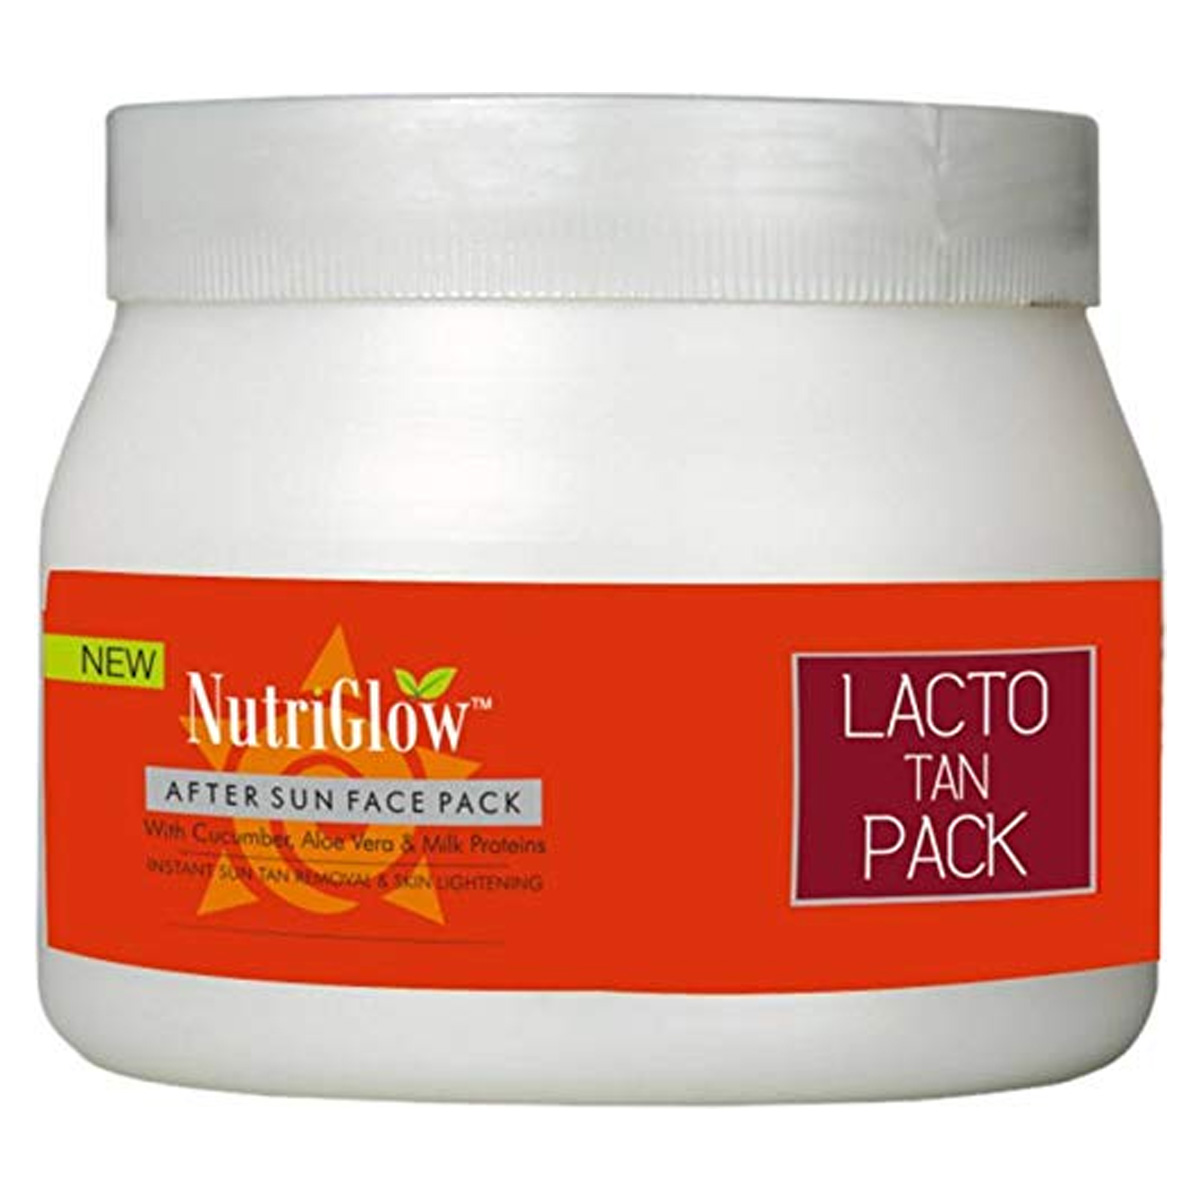 NutriGlow Lacto Tan Face Pack WIth Cucumber & Aloe Vera, 300gm